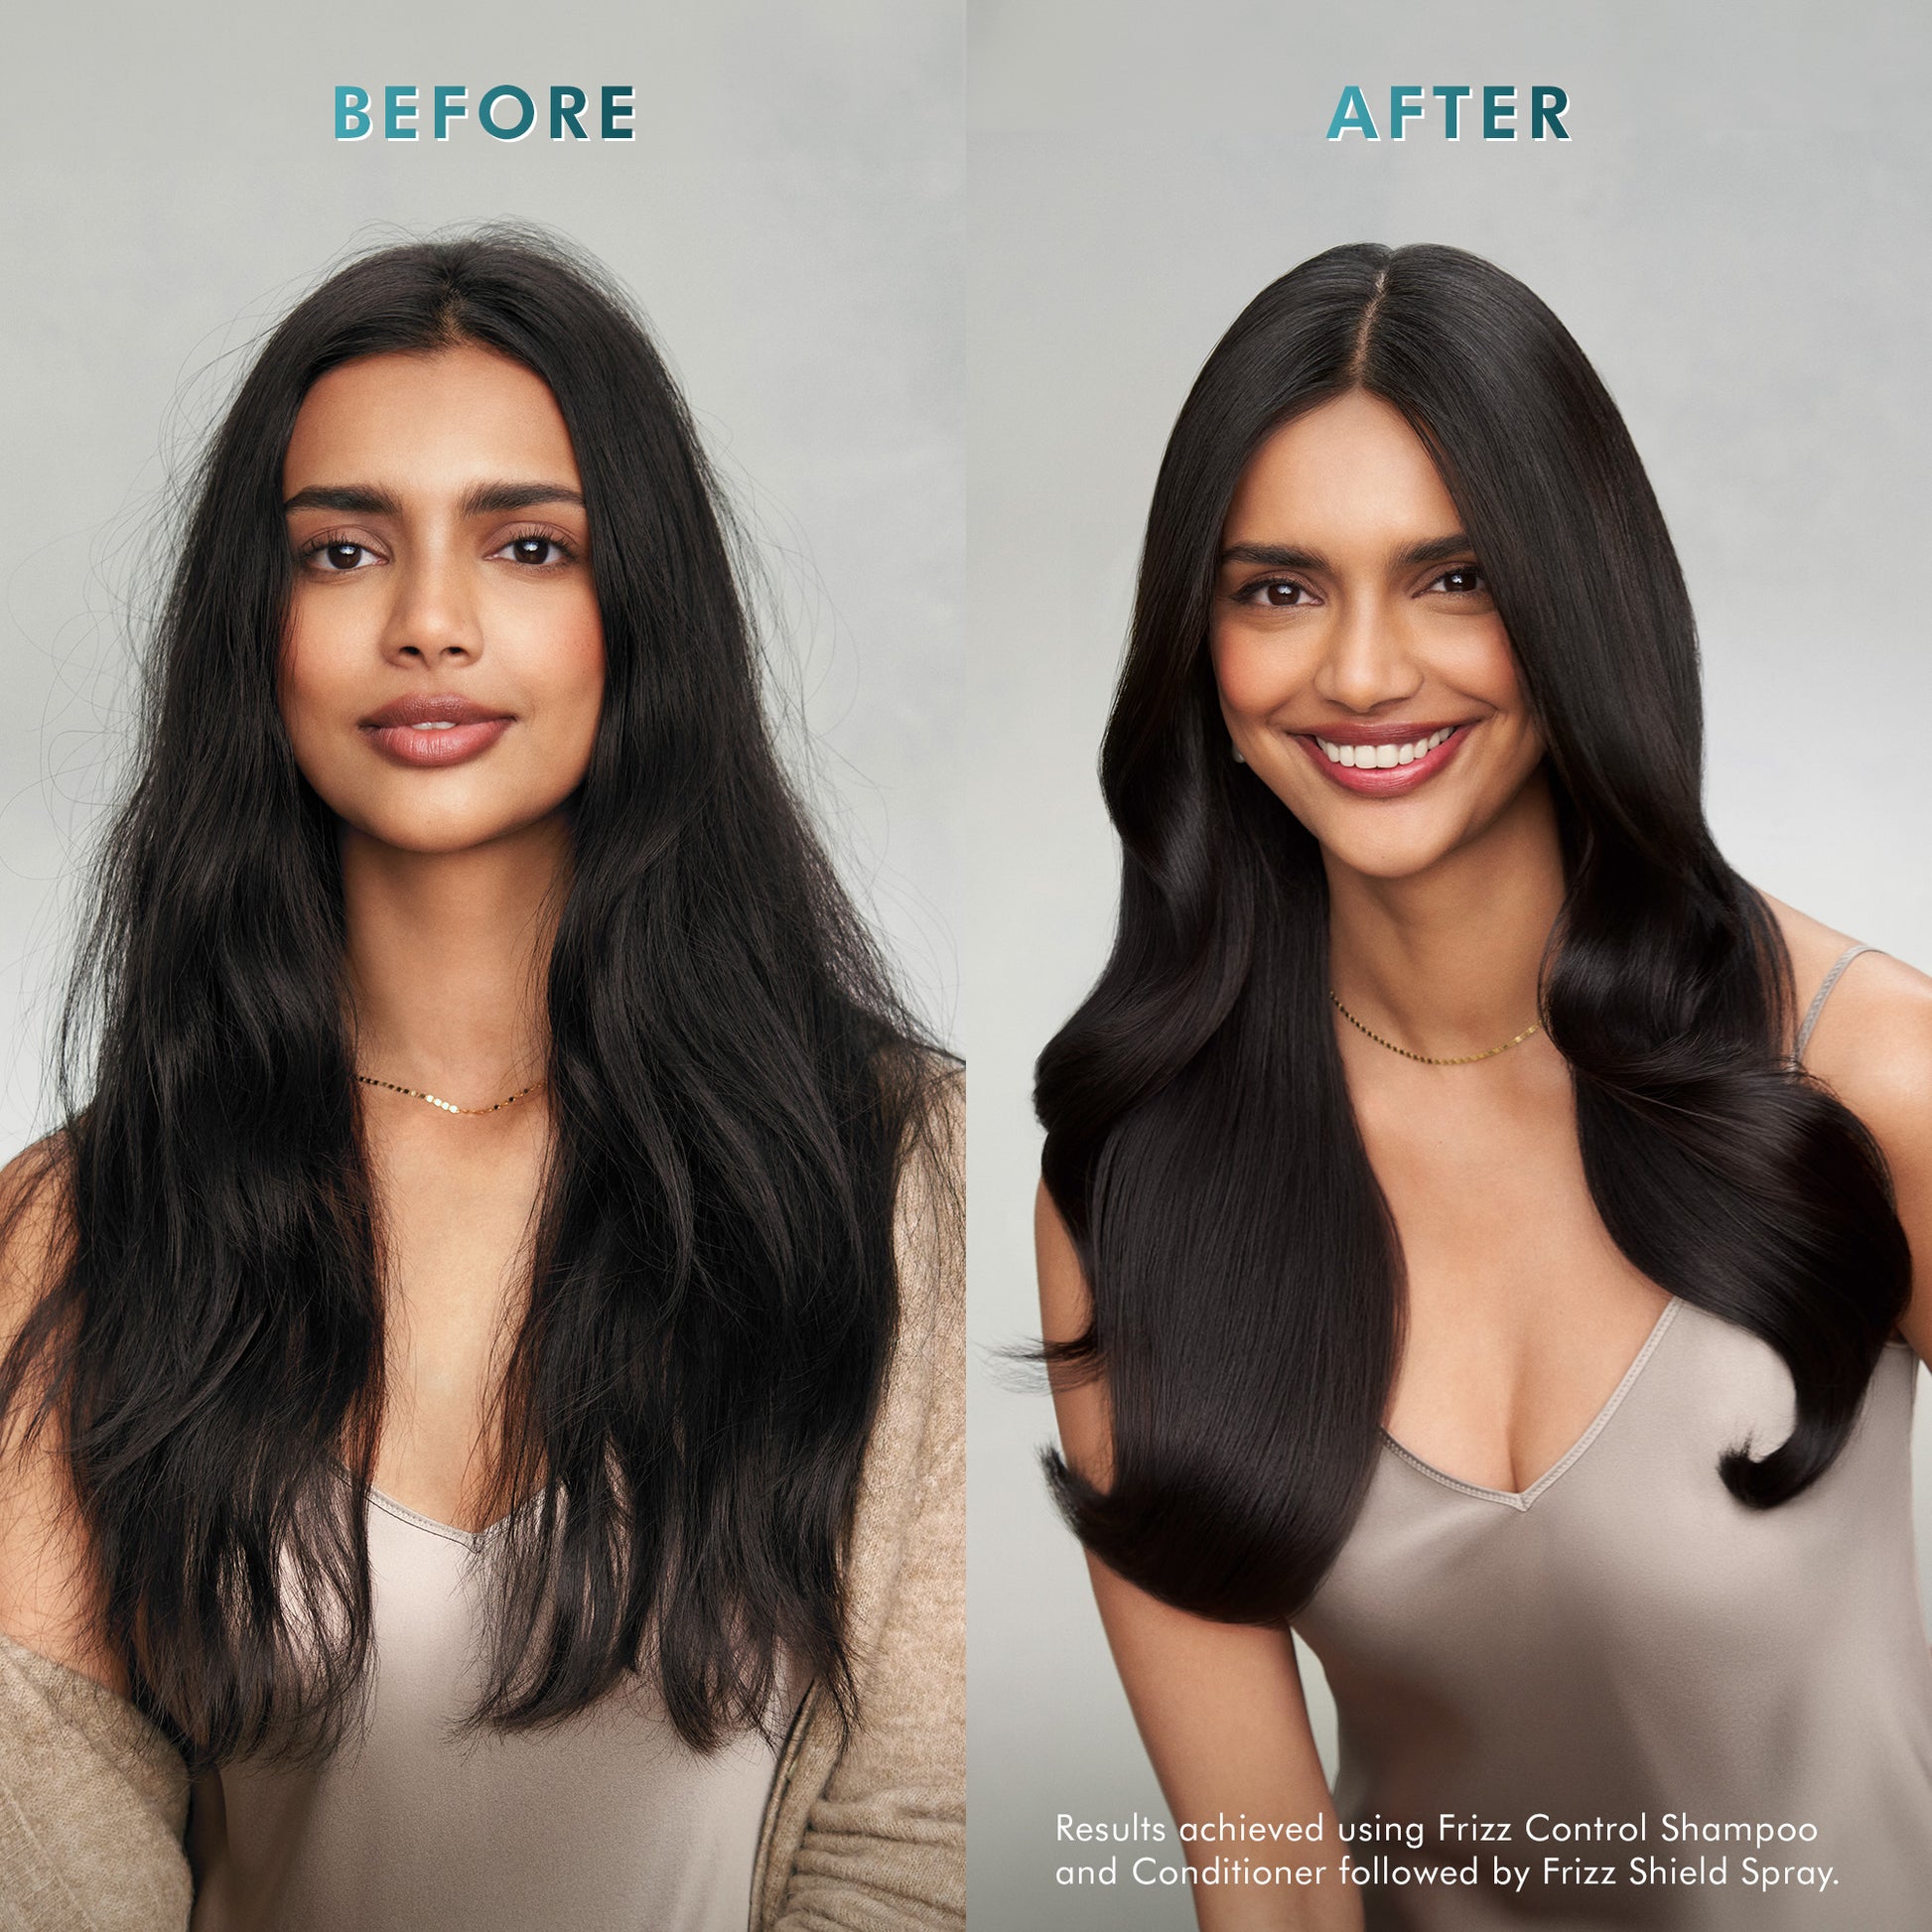 Frizz Control Shampoo and Conditioner Before and After  model images